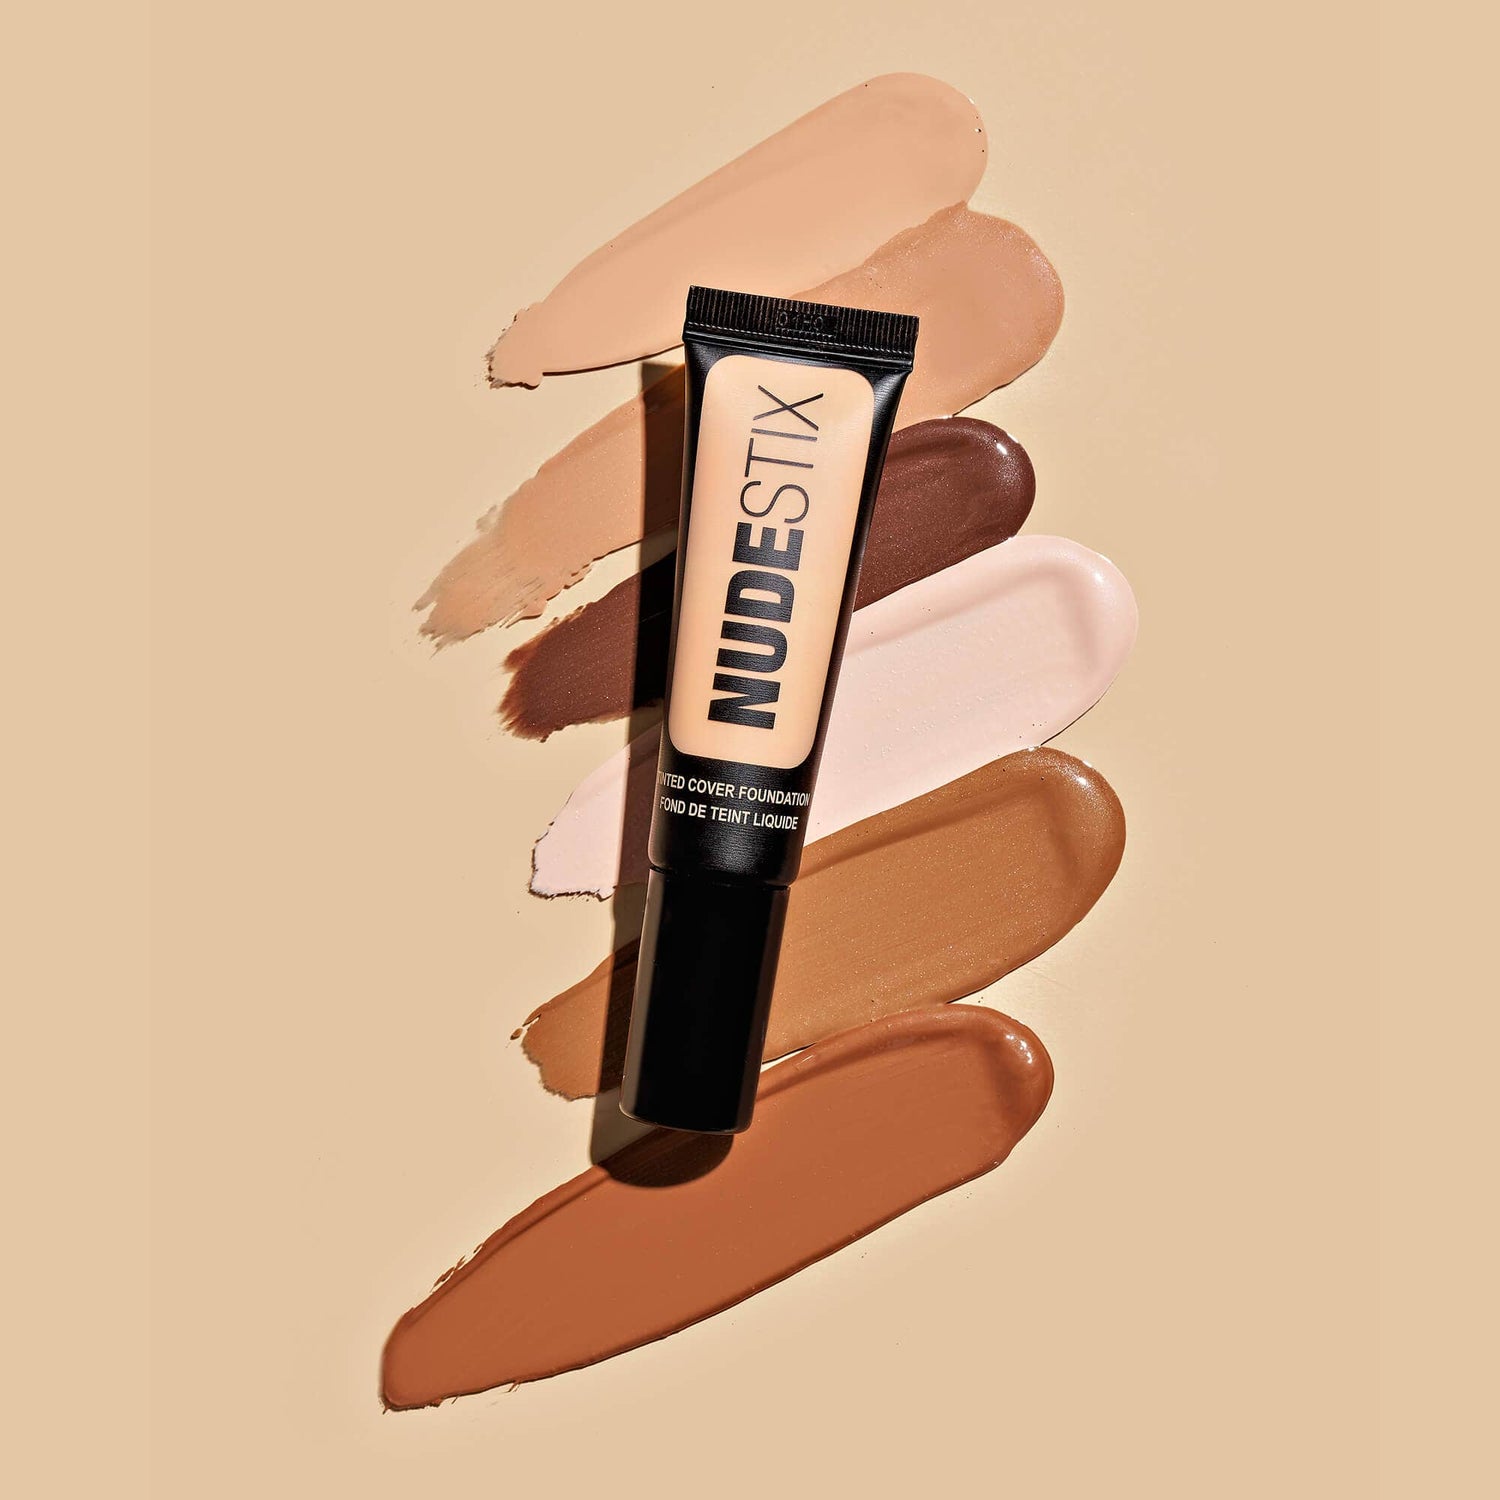 Tinted Cover Liquid Foundation in shade Nude 1.5 with texture swatches behind